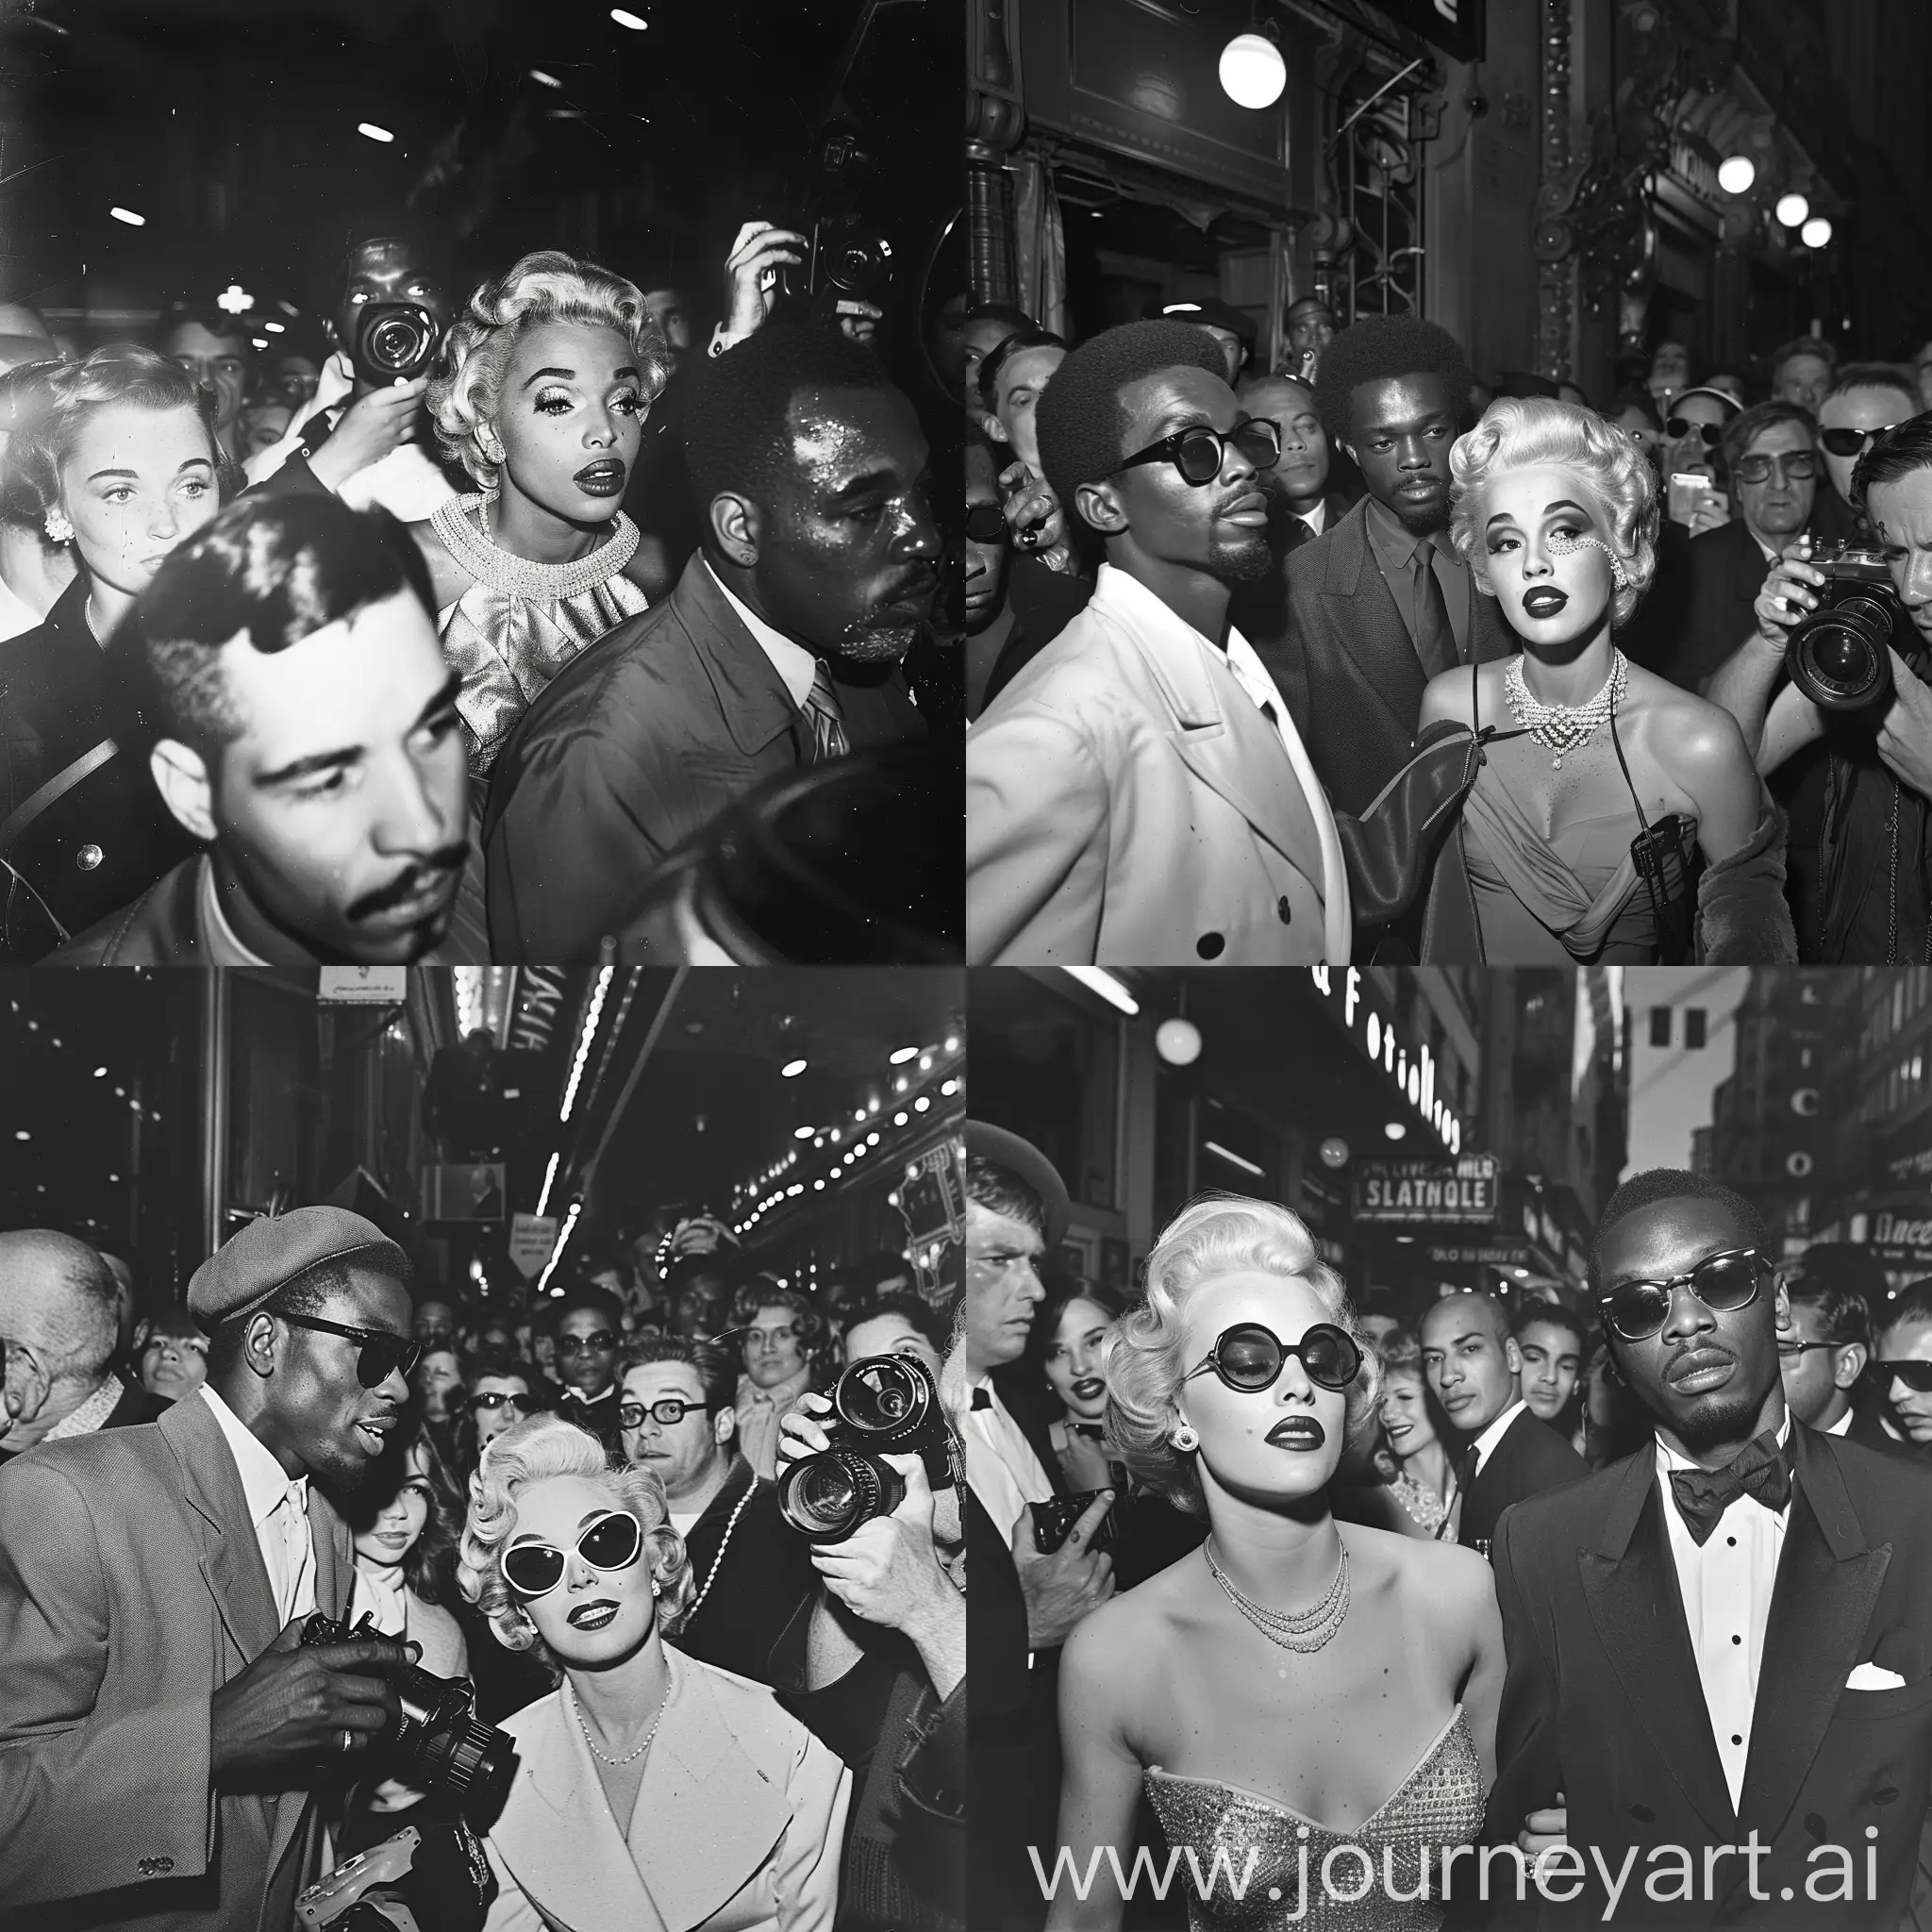 Iconic-Black-and-White-Image-HipHop-Royalty-Meets-Hollywood-Glamour-at-Theatre-Exit